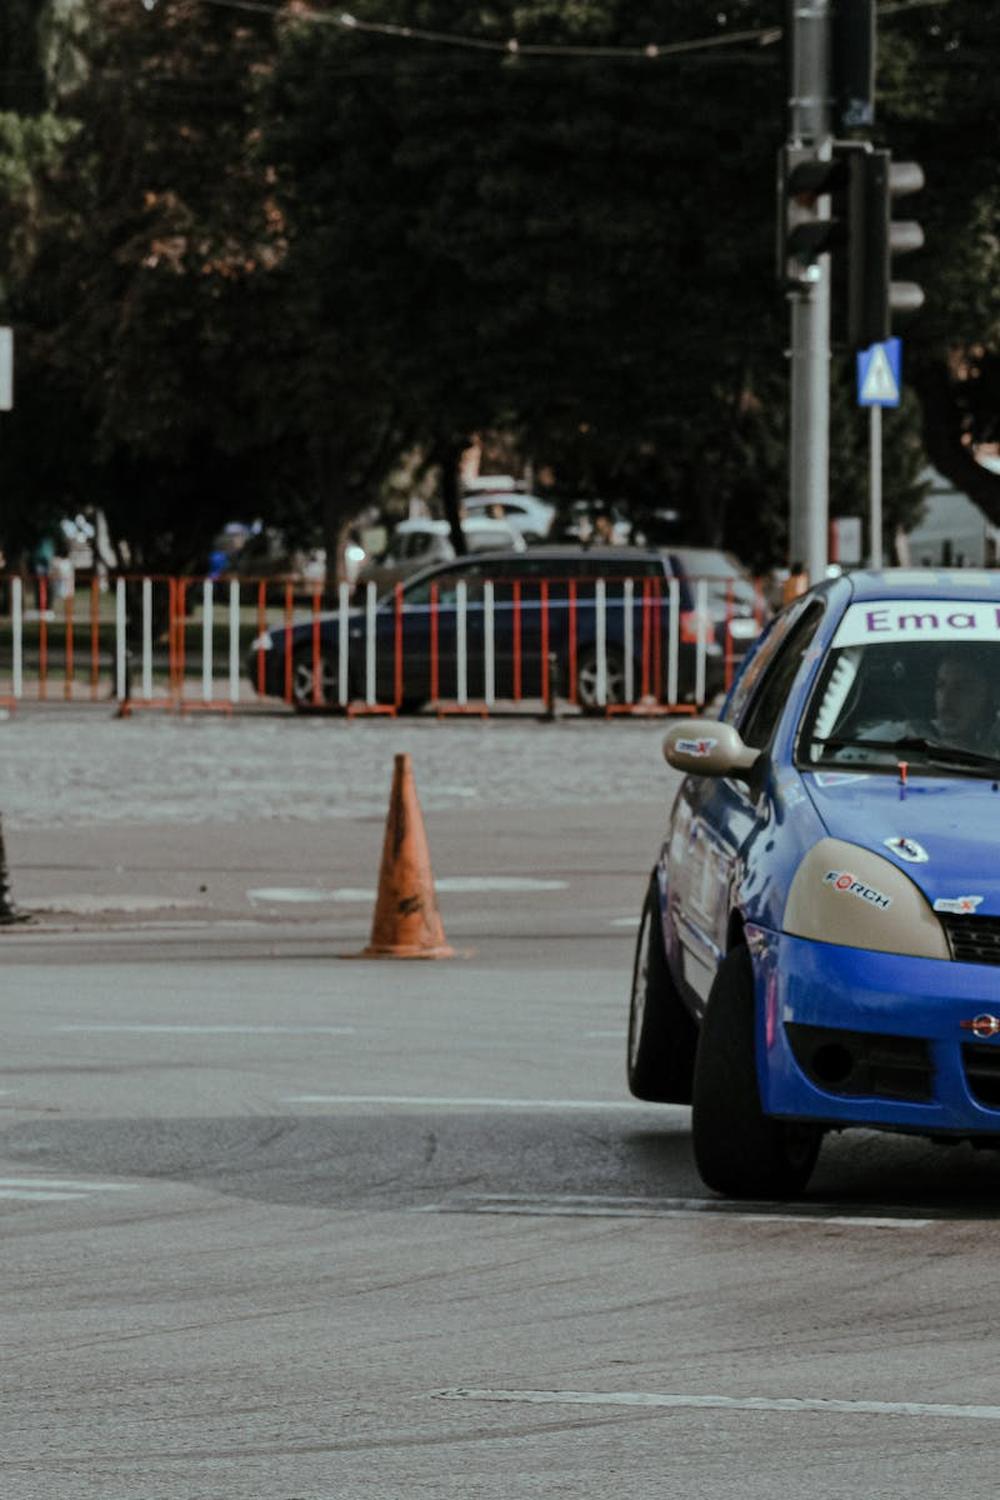 small_rally_car_driving_in_city